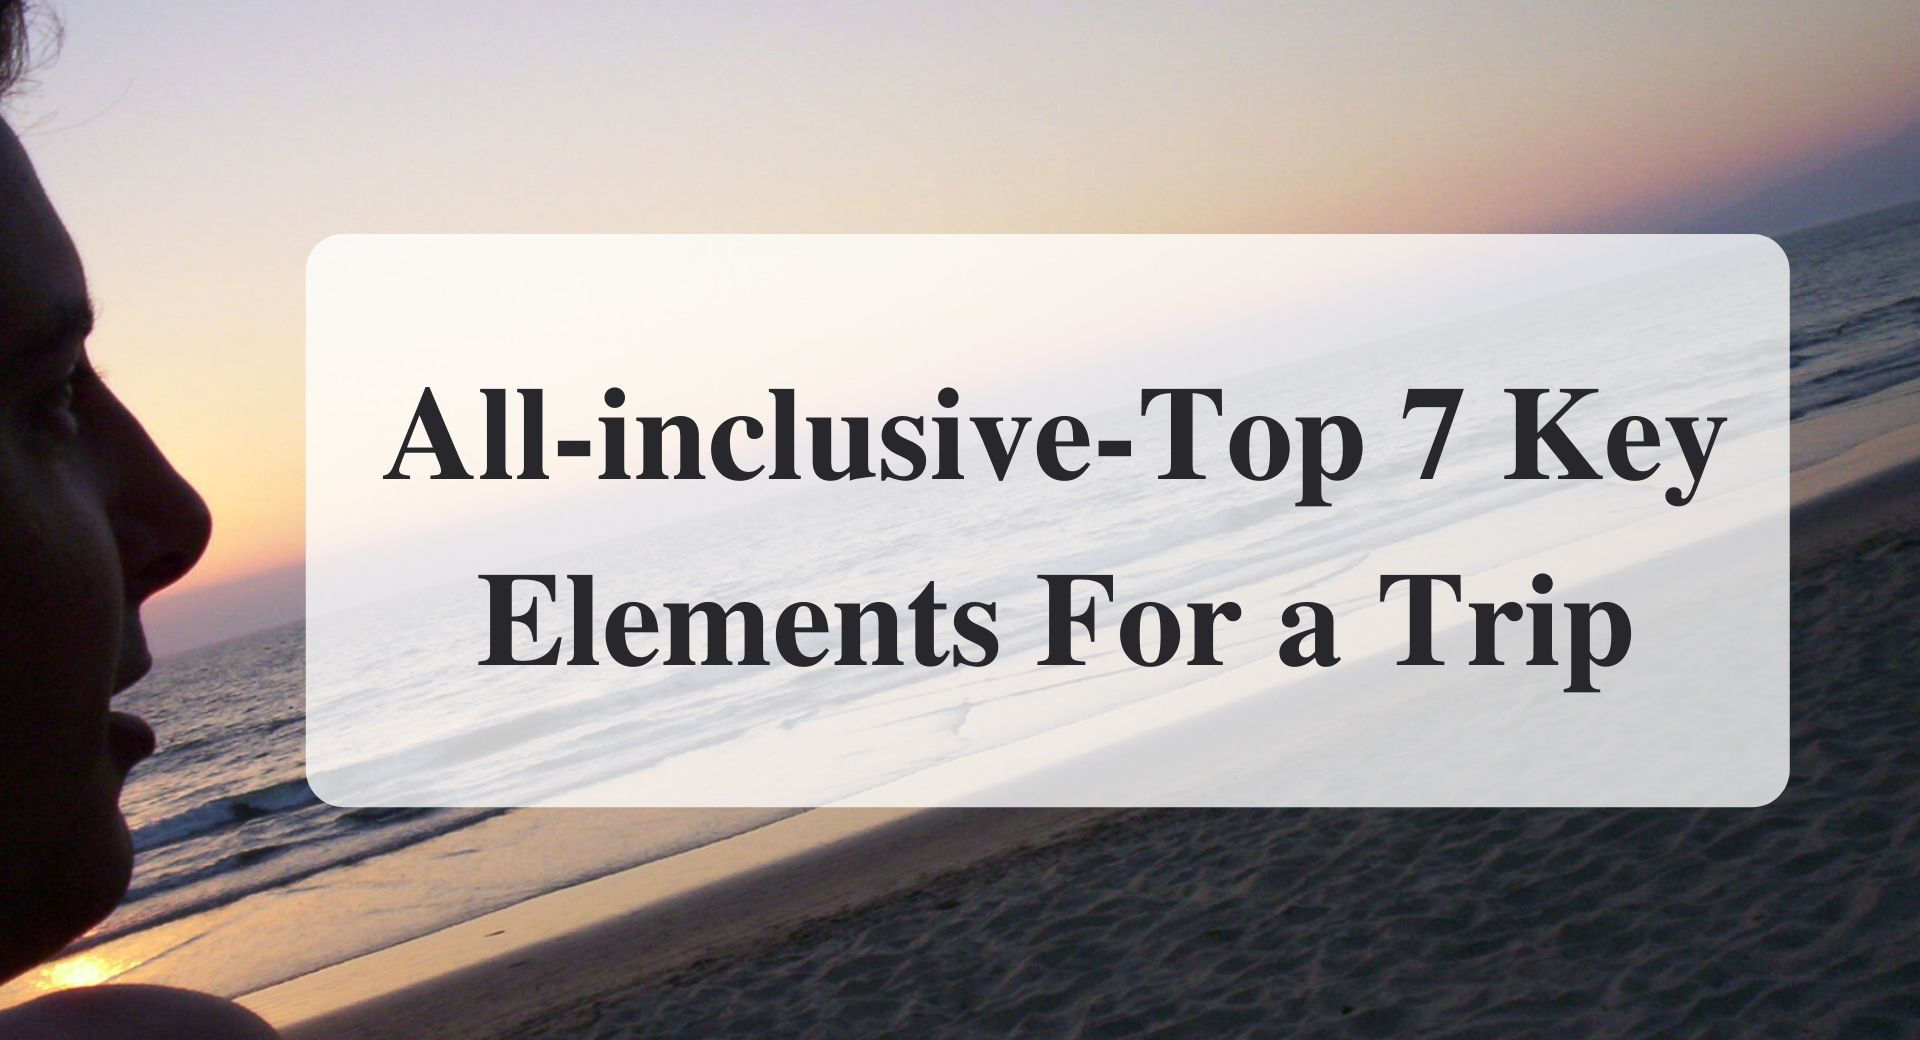 All-inclusive-Top 7 Key Elements For a Trip Forever sabbatical main